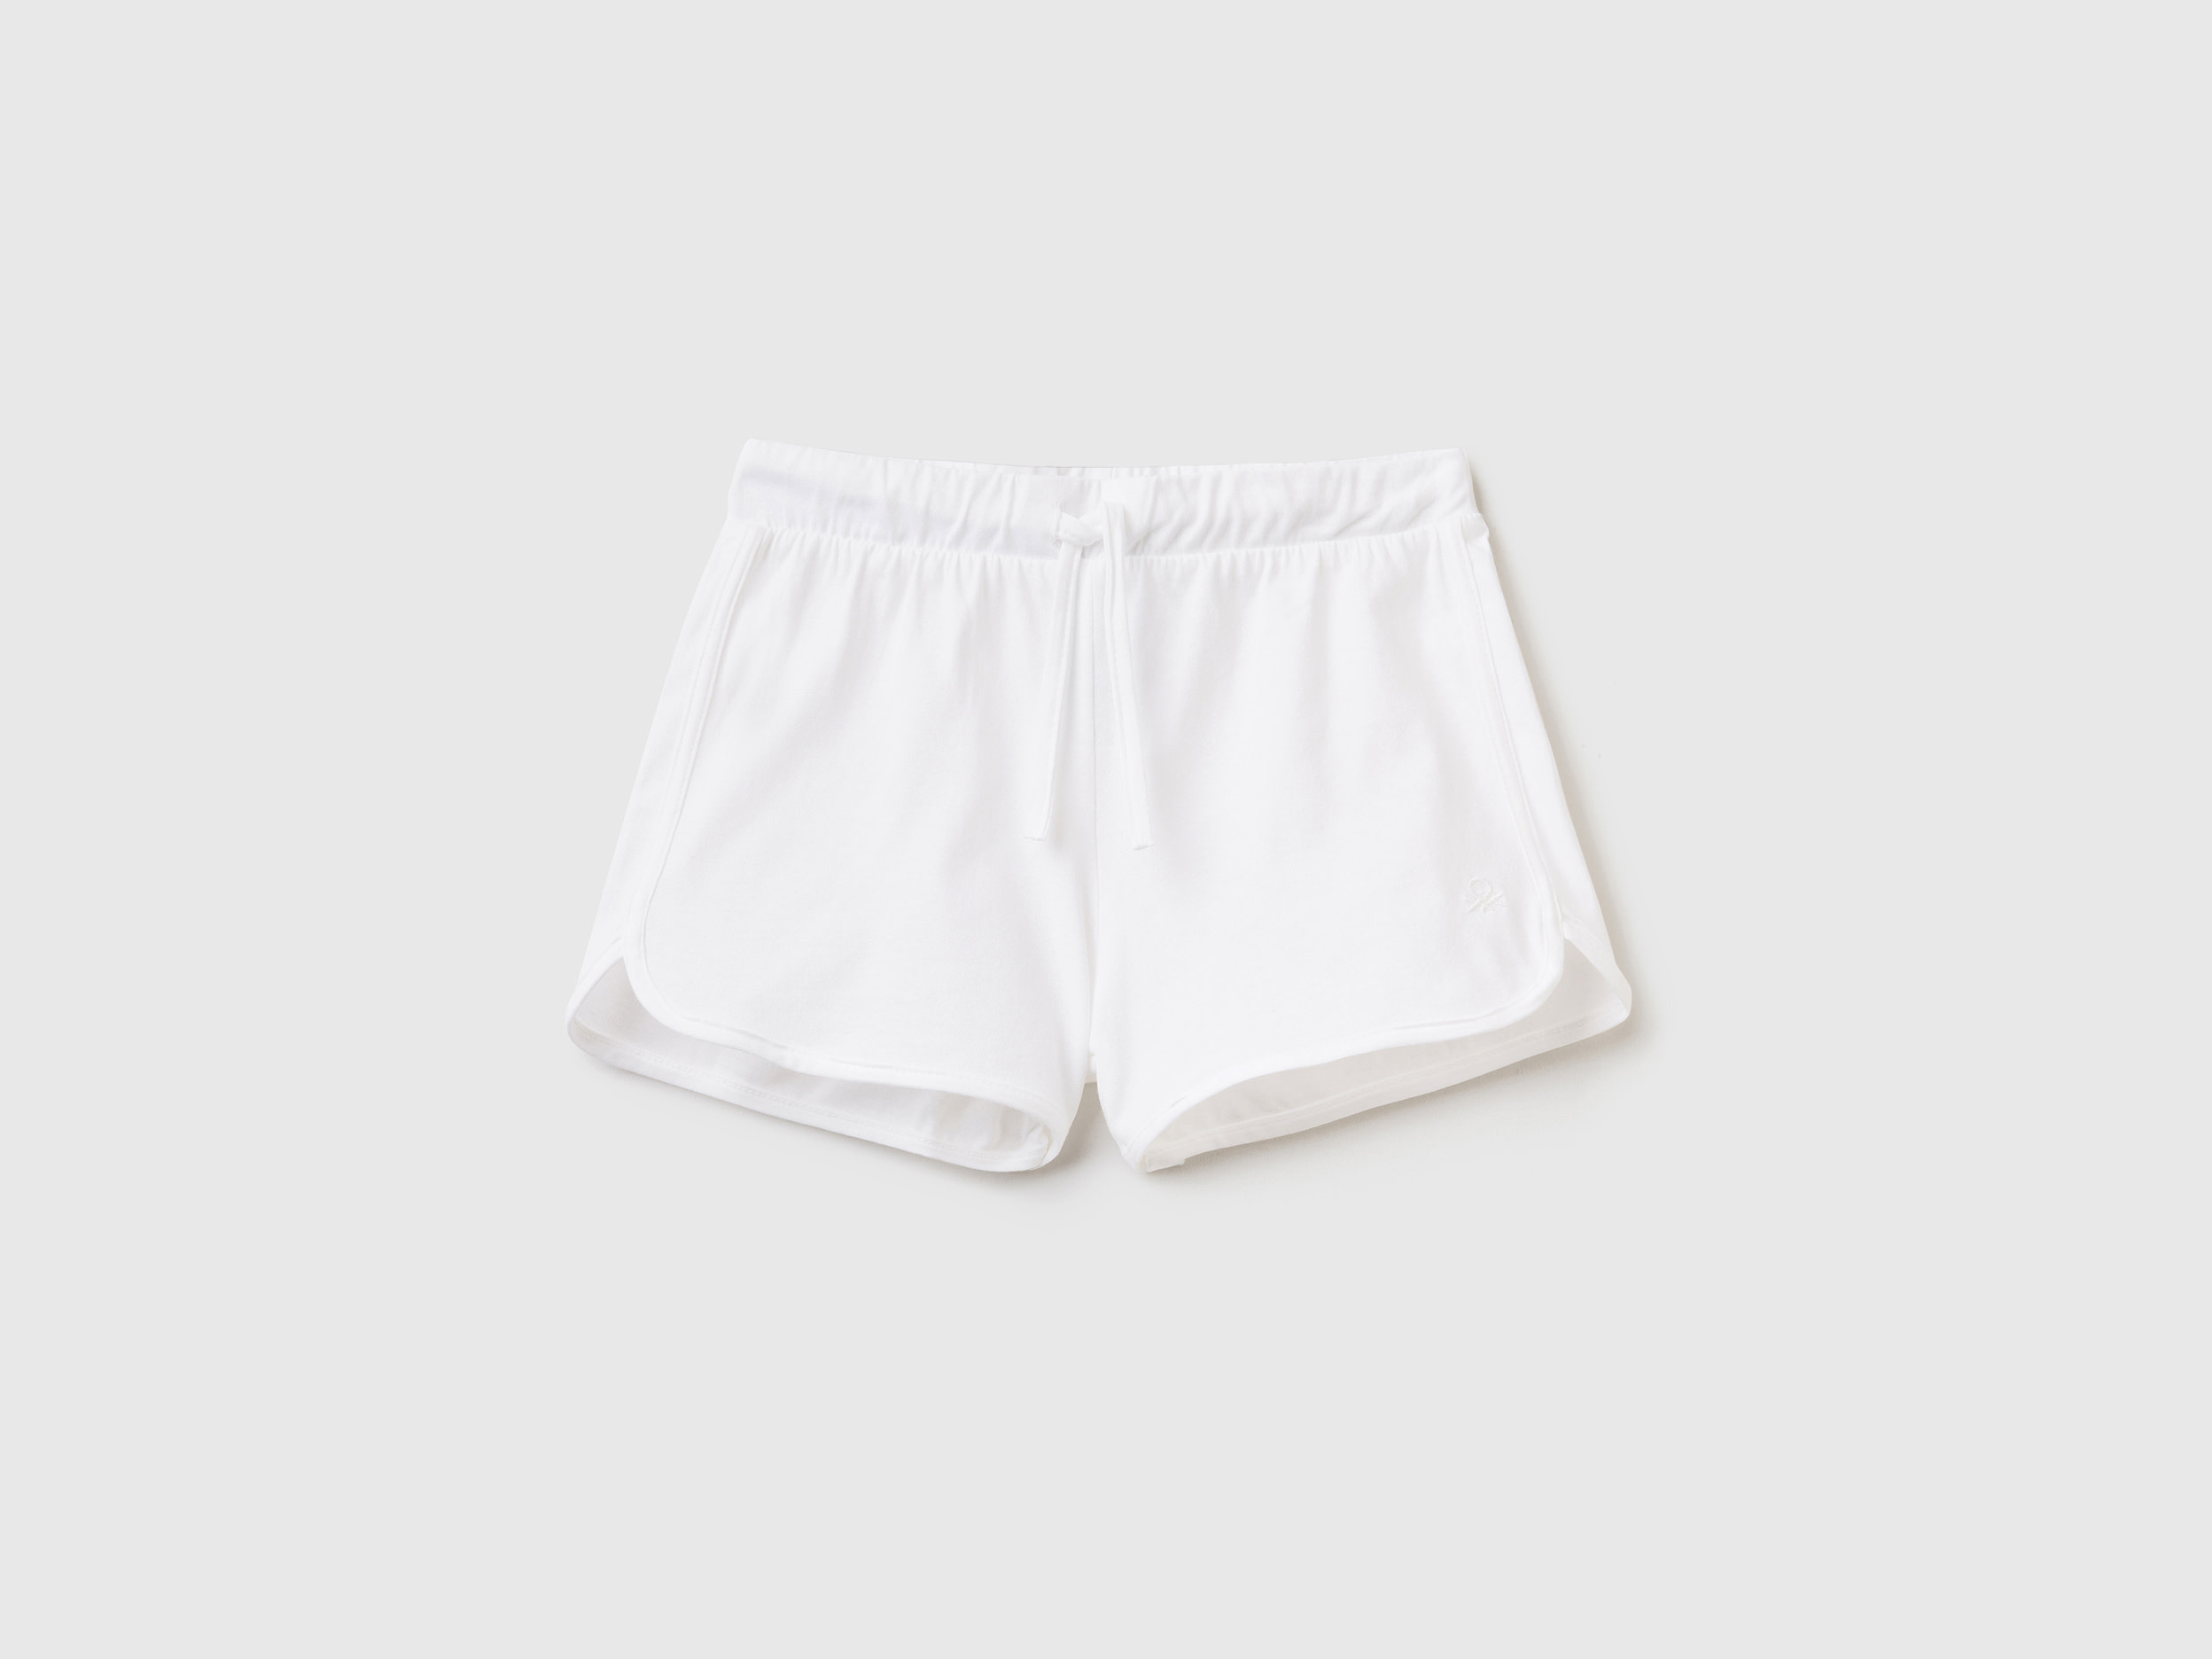 Image of Benetton, Runner Style Shorts In Organic Cotton, size XL, White, Kids